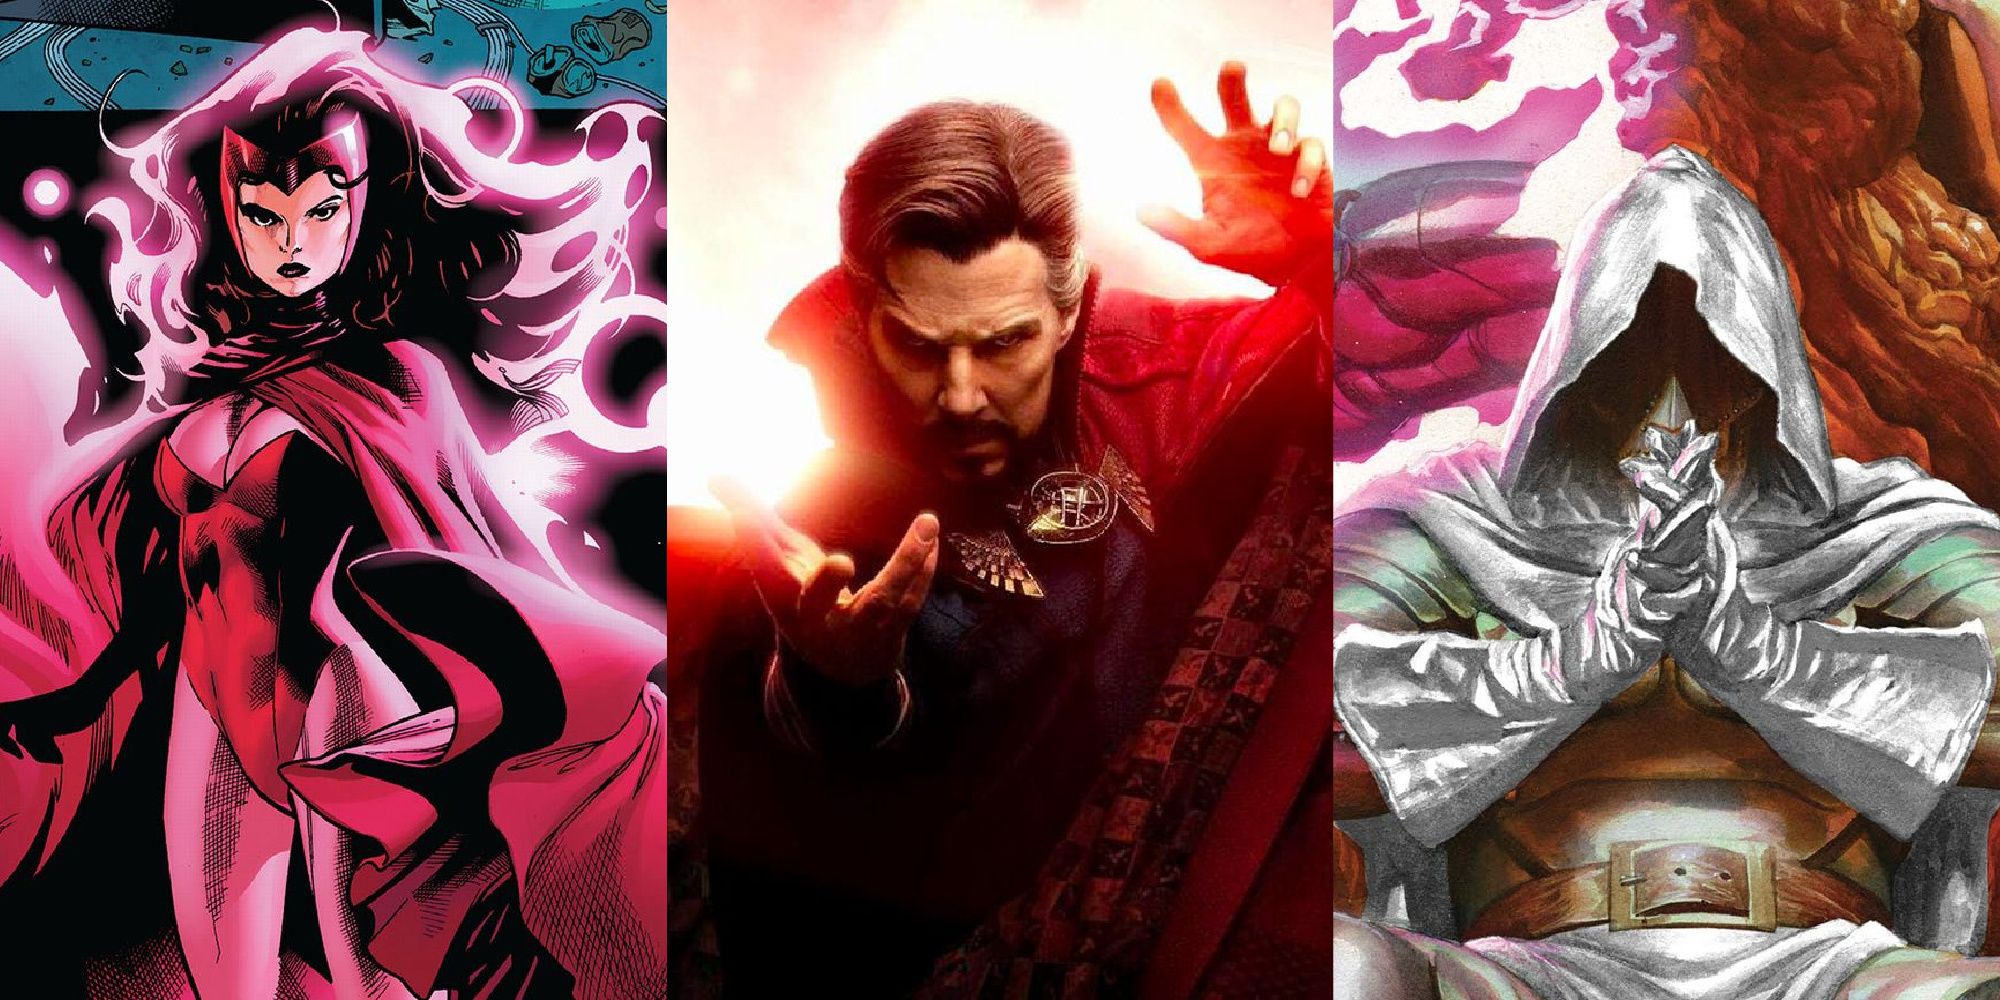 Split image of Scarlet Witch and Doctor Doom from Marvel Comics and Doctor Strange from Multiverse of Madness.